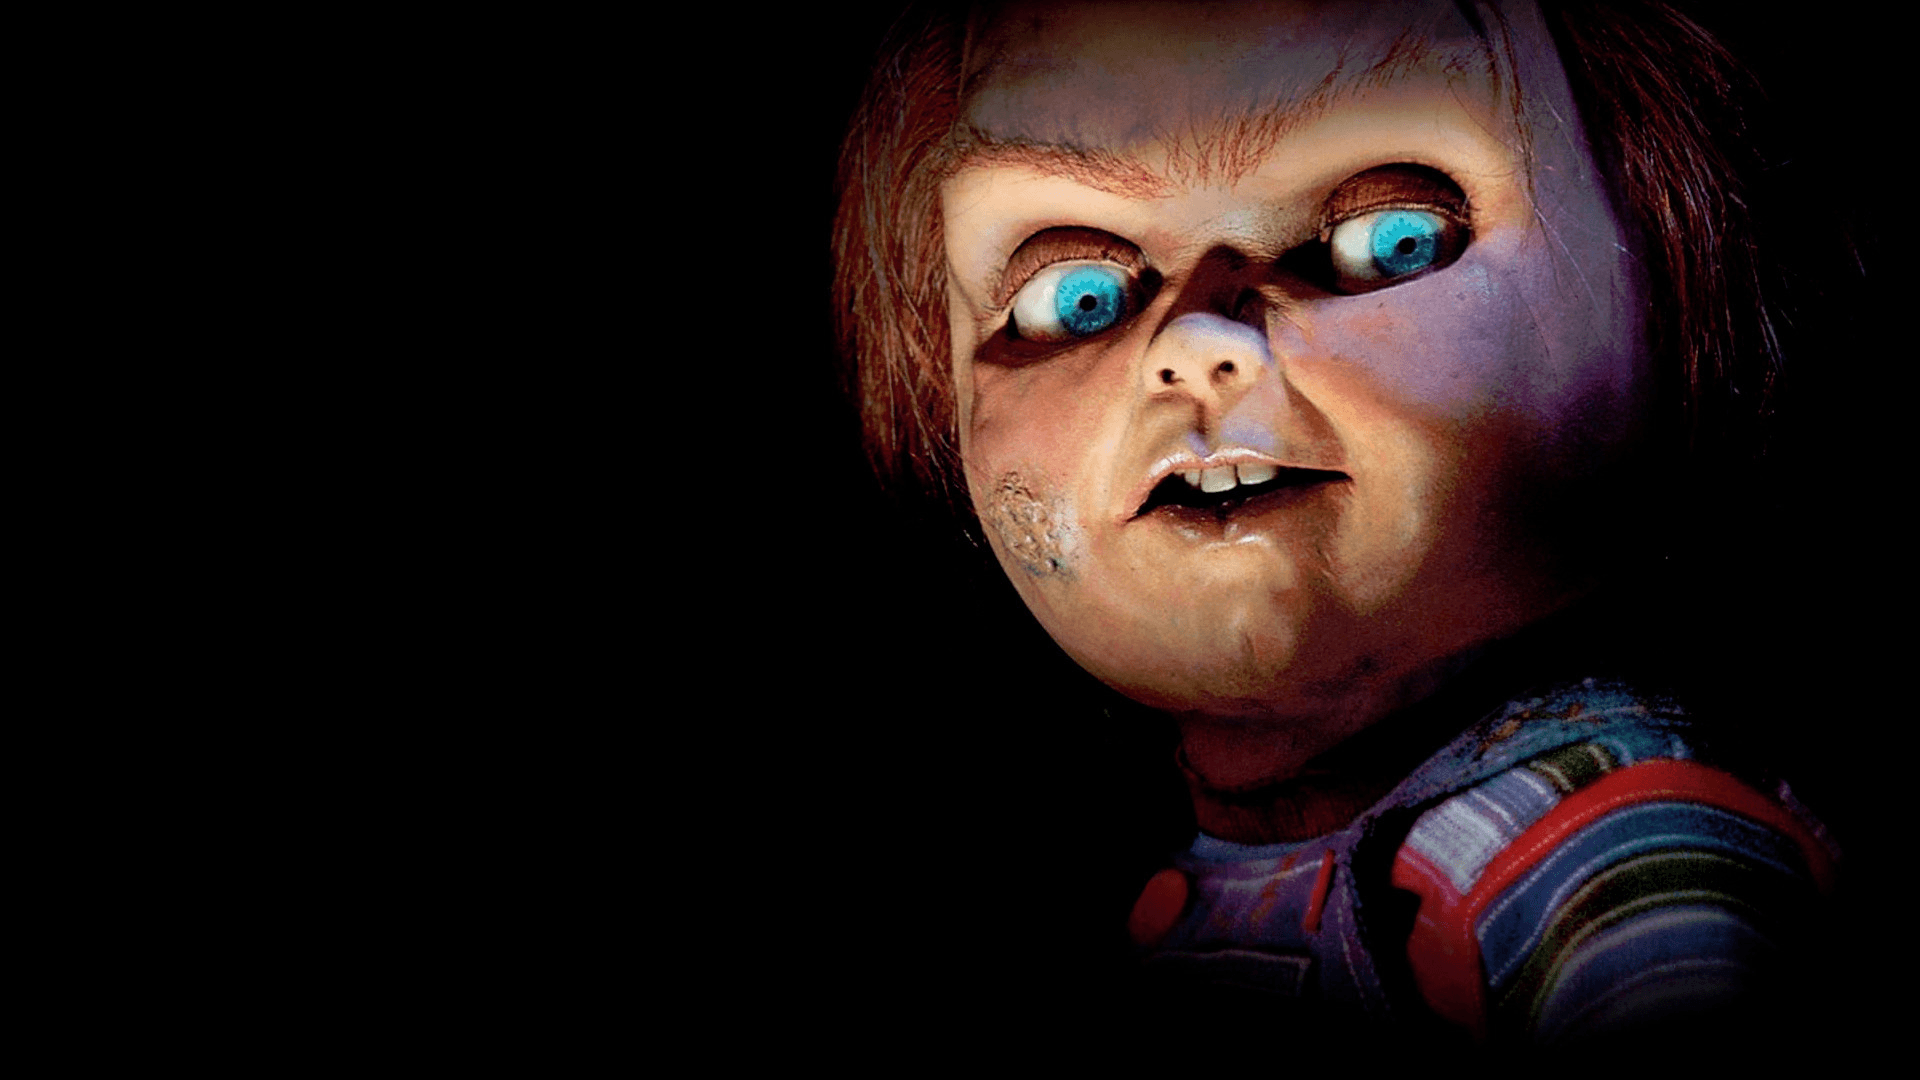 Facts You (Probably) Didn't Know About Chucky